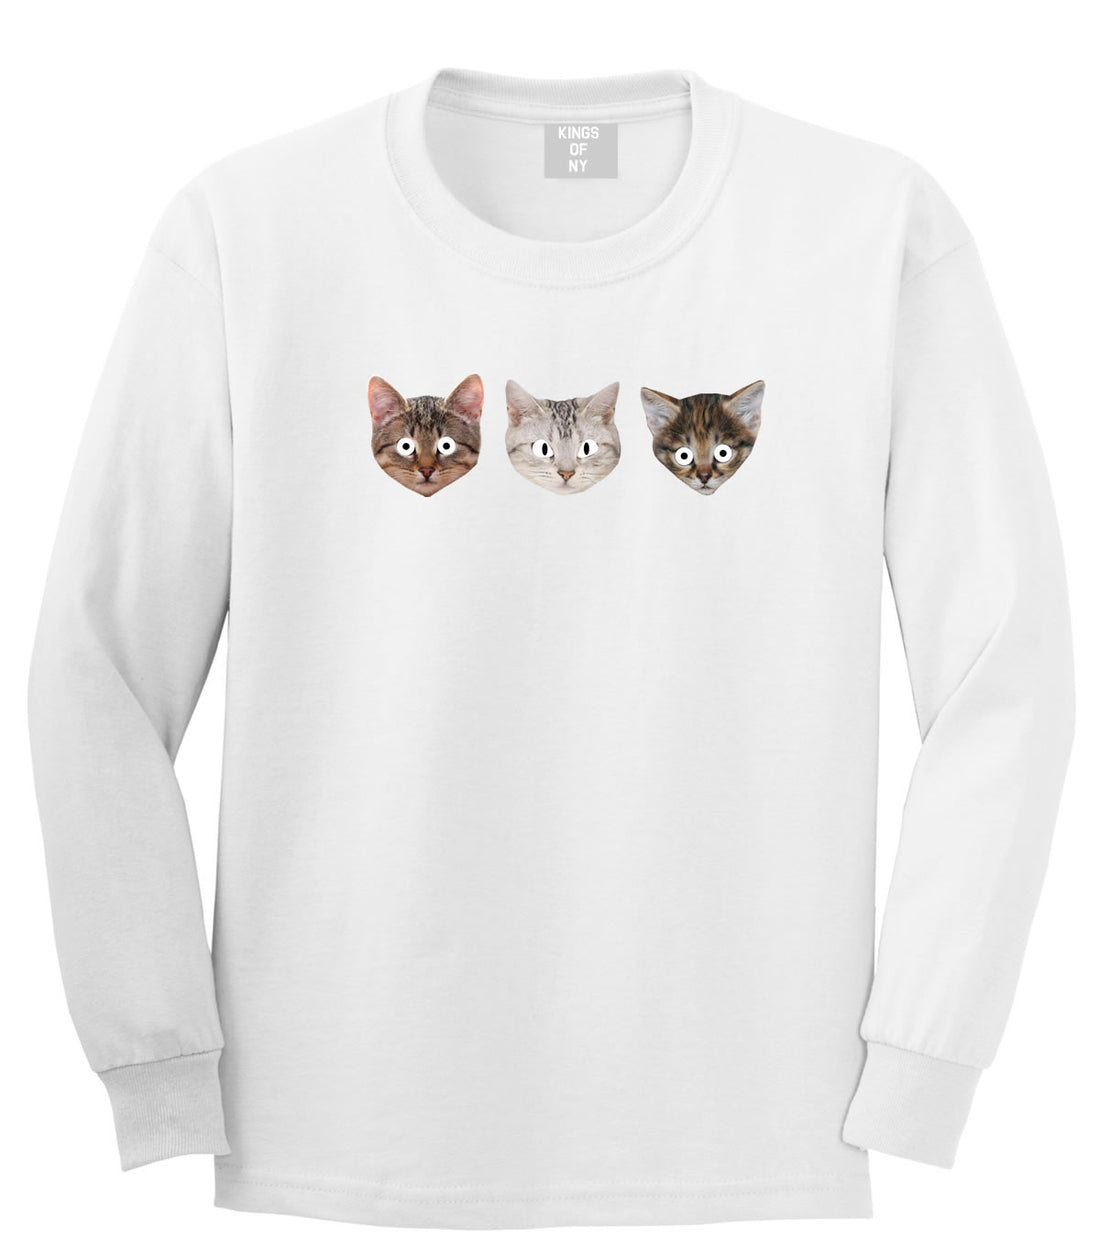 Cats Crazy Kittens Long Sleeve T-Shirt in White By Kings Of NY